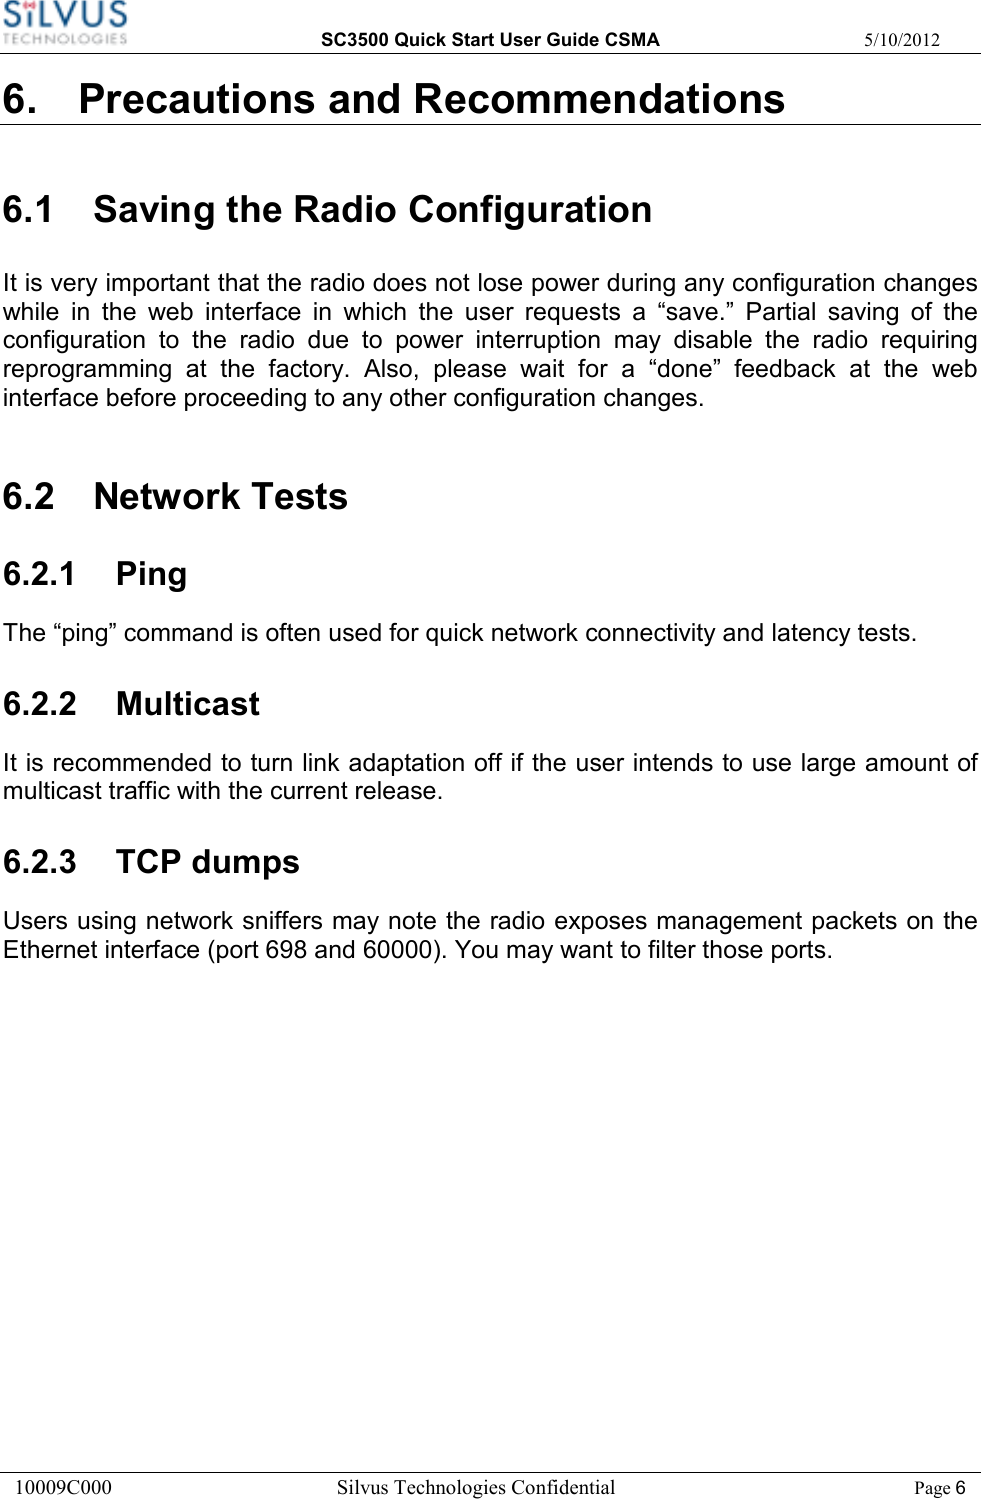  SC3500 Quick Start User Guide CSMA  5/10/2012 10009C000       Silvus Technologies Confidential    Page 6 6.  Precautions and Recommendations 6.1  Saving the Radio Configuration It is very important that the radio does not lose power during any configuration changes while  in  the  web  interface  in  which  the  user  requests  a  “save.”  Partial  saving  of  the configuration  to  the  radio  due  to  power  interruption  may  disable  the  radio  requiring reprogramming  at  the  factory.  Also,  please  wait  for  a  “done”  feedback  at  the  web interface before proceeding to any other configuration changes. 6.2  Network Tests 6.2.1  Ping The “ping” command is often used for quick network connectivity and latency tests.  6.2.2  Multicast It is recommended to turn link adaptation off if the user intends to use large amount of multicast traffic with the current release.  6.2.3  TCP dumps Users using network sniffers may note the radio exposes management packets on the Ethernet interface (port 698 and 60000). You may want to filter those ports.         